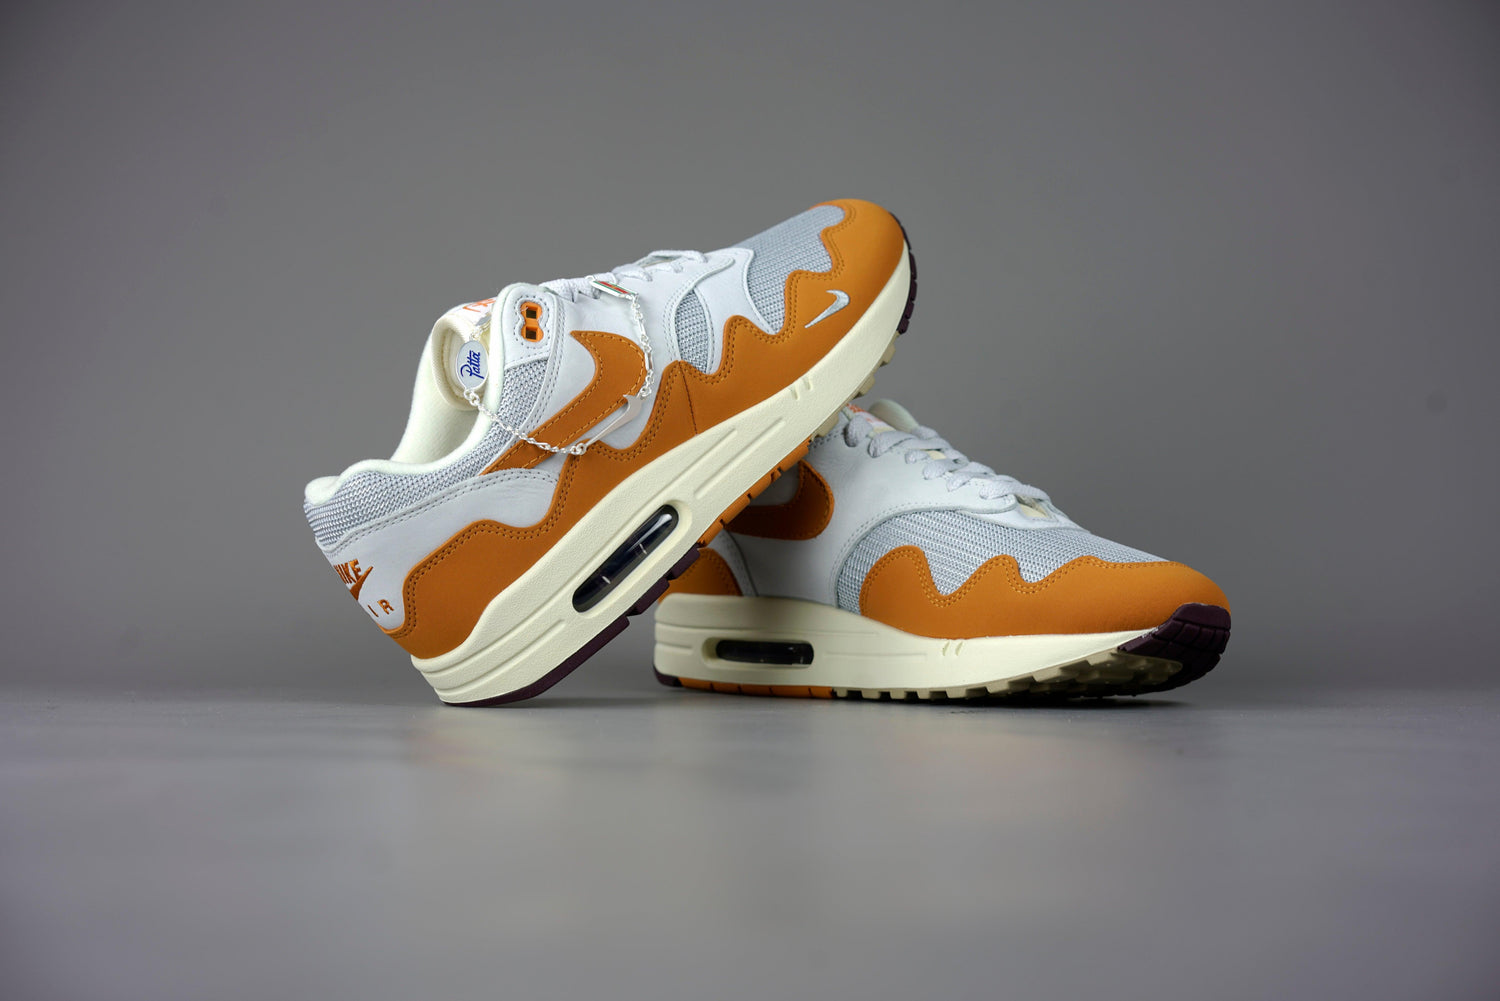 Nike Air Max 1 Patta Waves Monarch (with Bracelet) Men's - DH1348